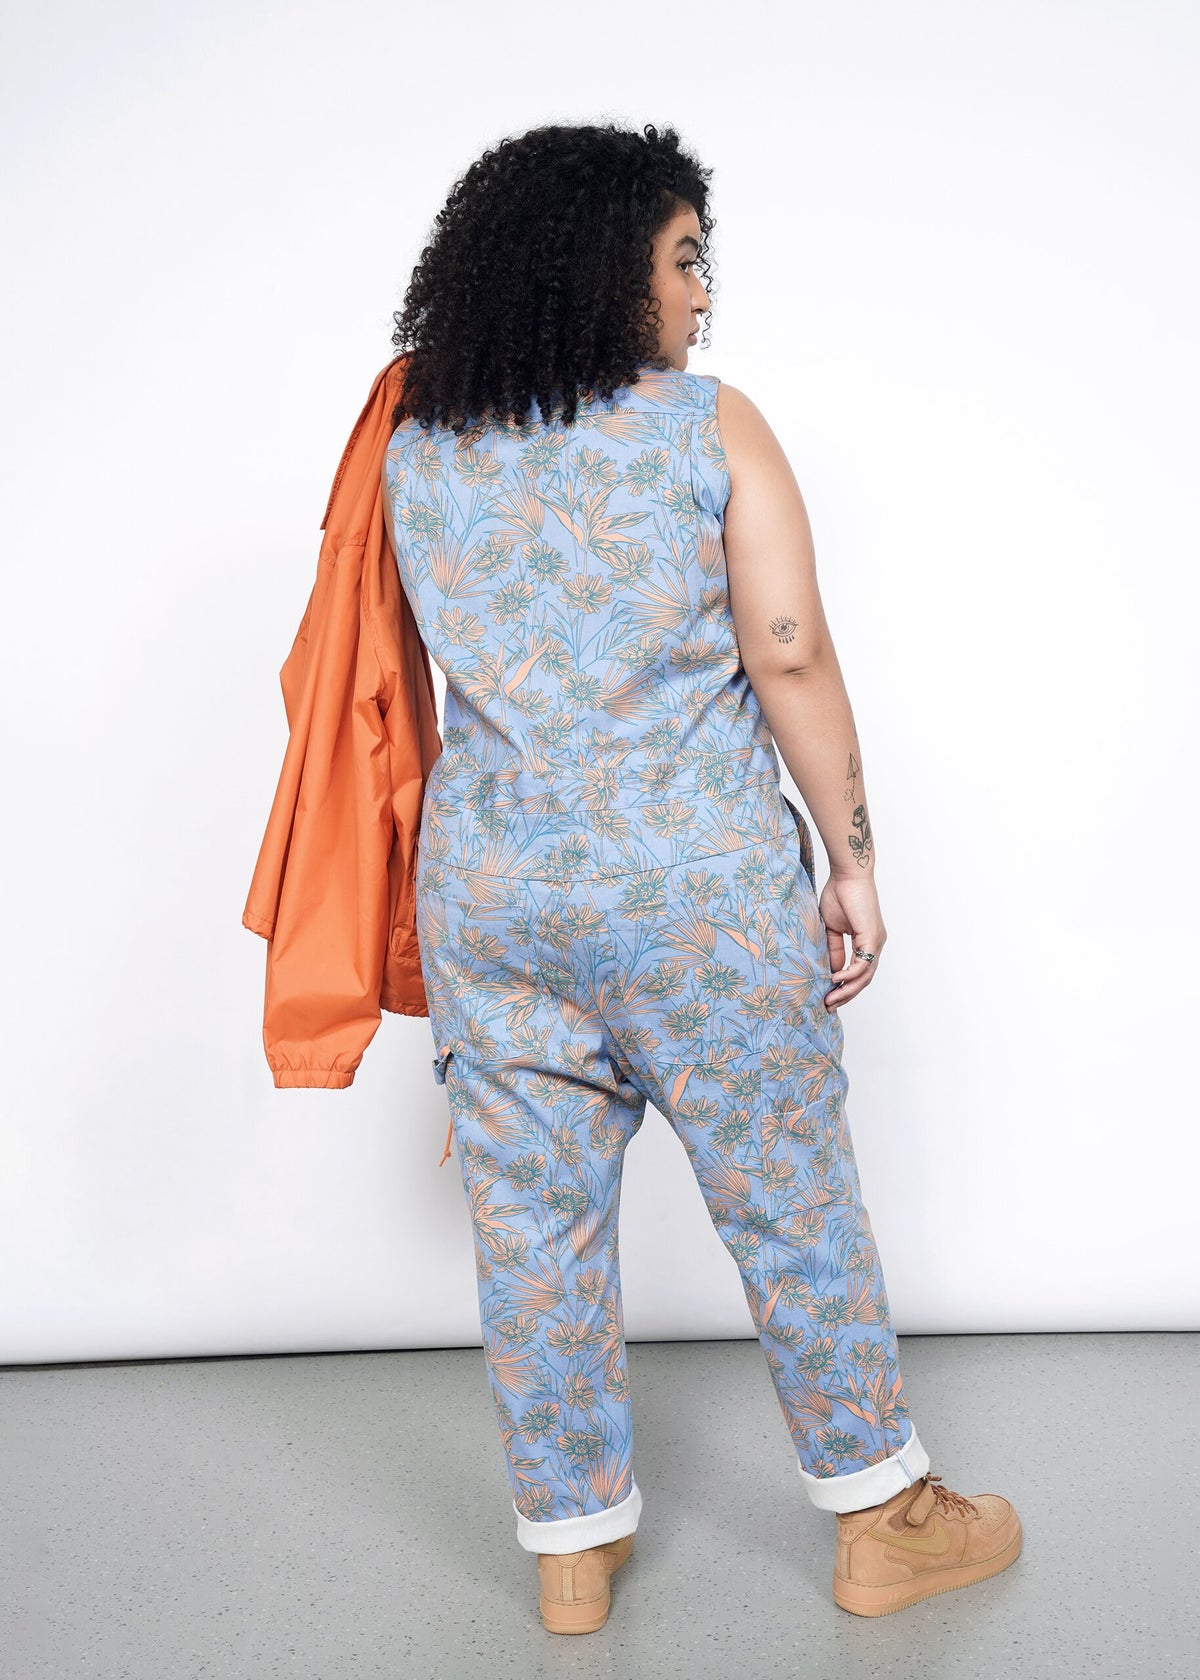 Back image of Model wearing the Essential Sleeveless Coverall in Flower Press Periwinkle in size XL with tan shoes and carrying an orange jacket